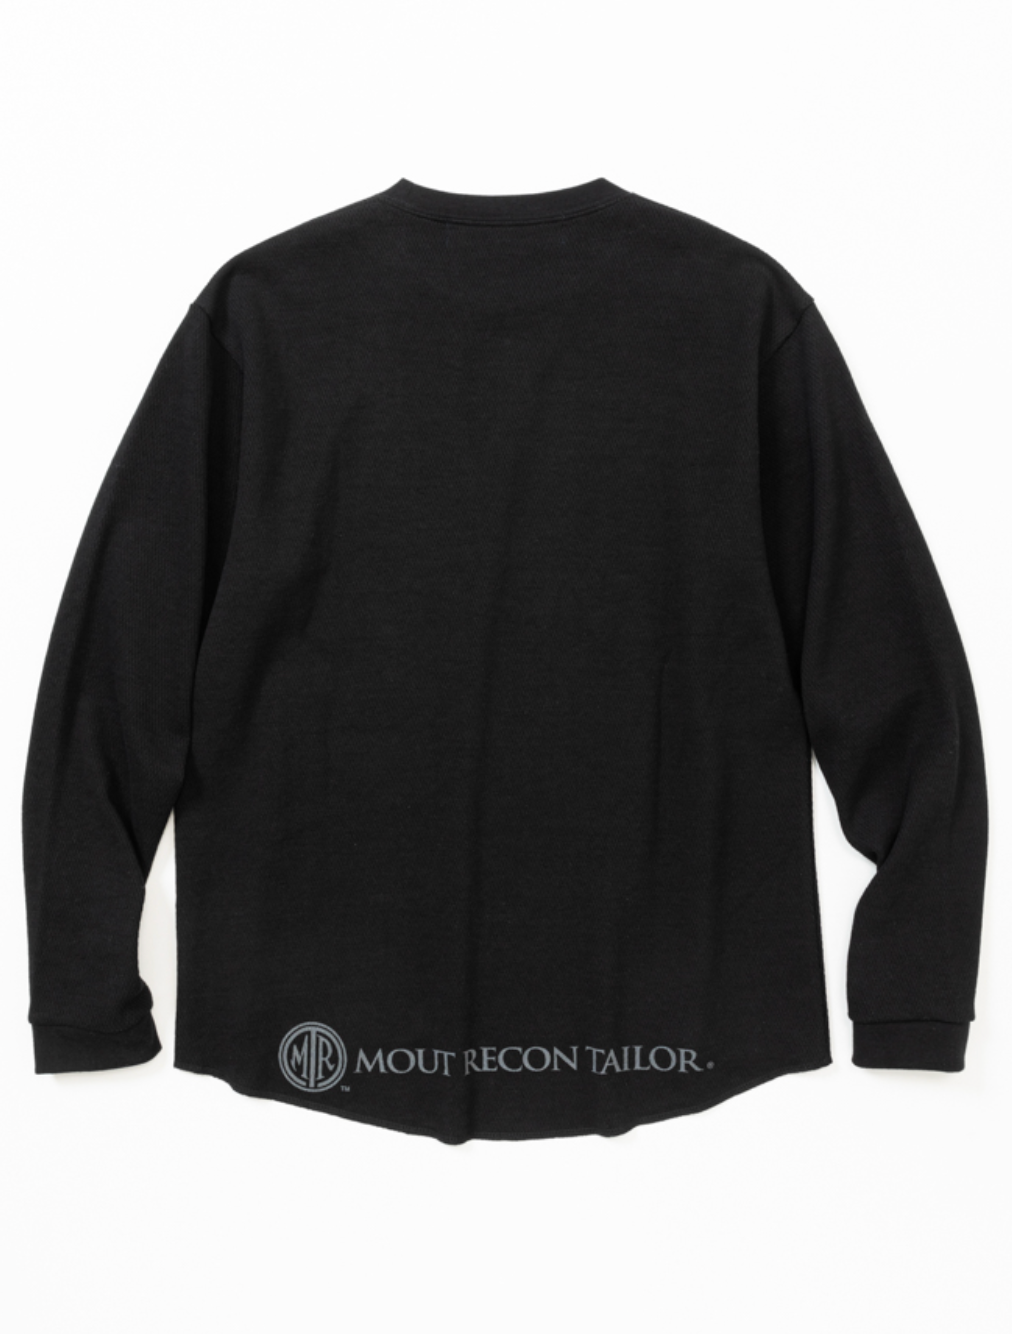 MOUT RECON TAILOR / マウトリーコンテーラーMT-1412 COLD WEATHER THERMAL LONG SLEEVE